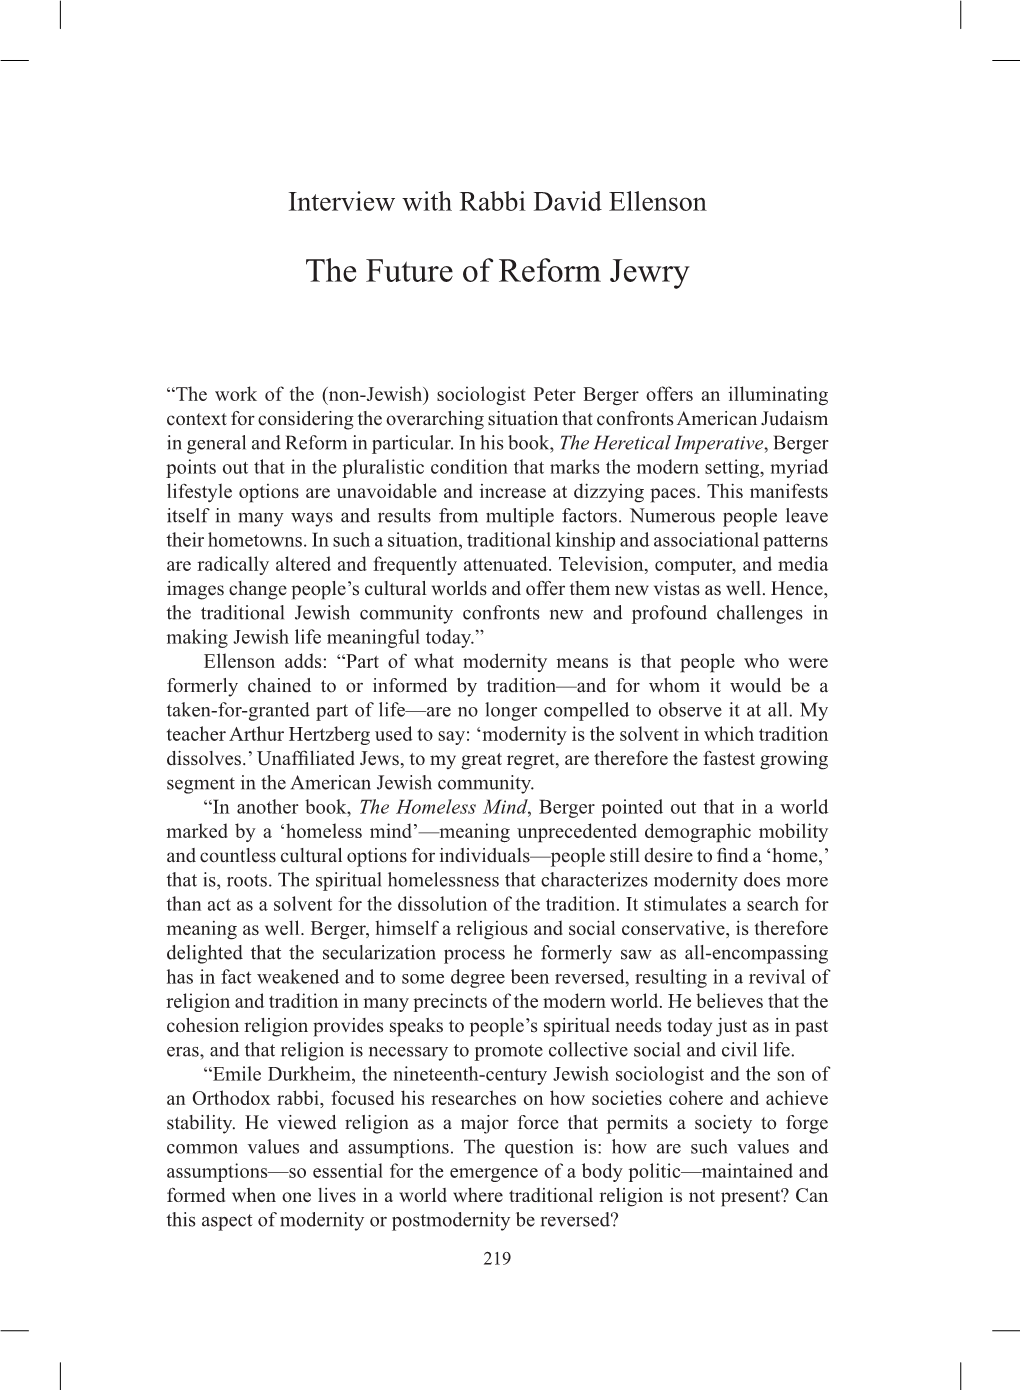 The Future of Reform Jewry